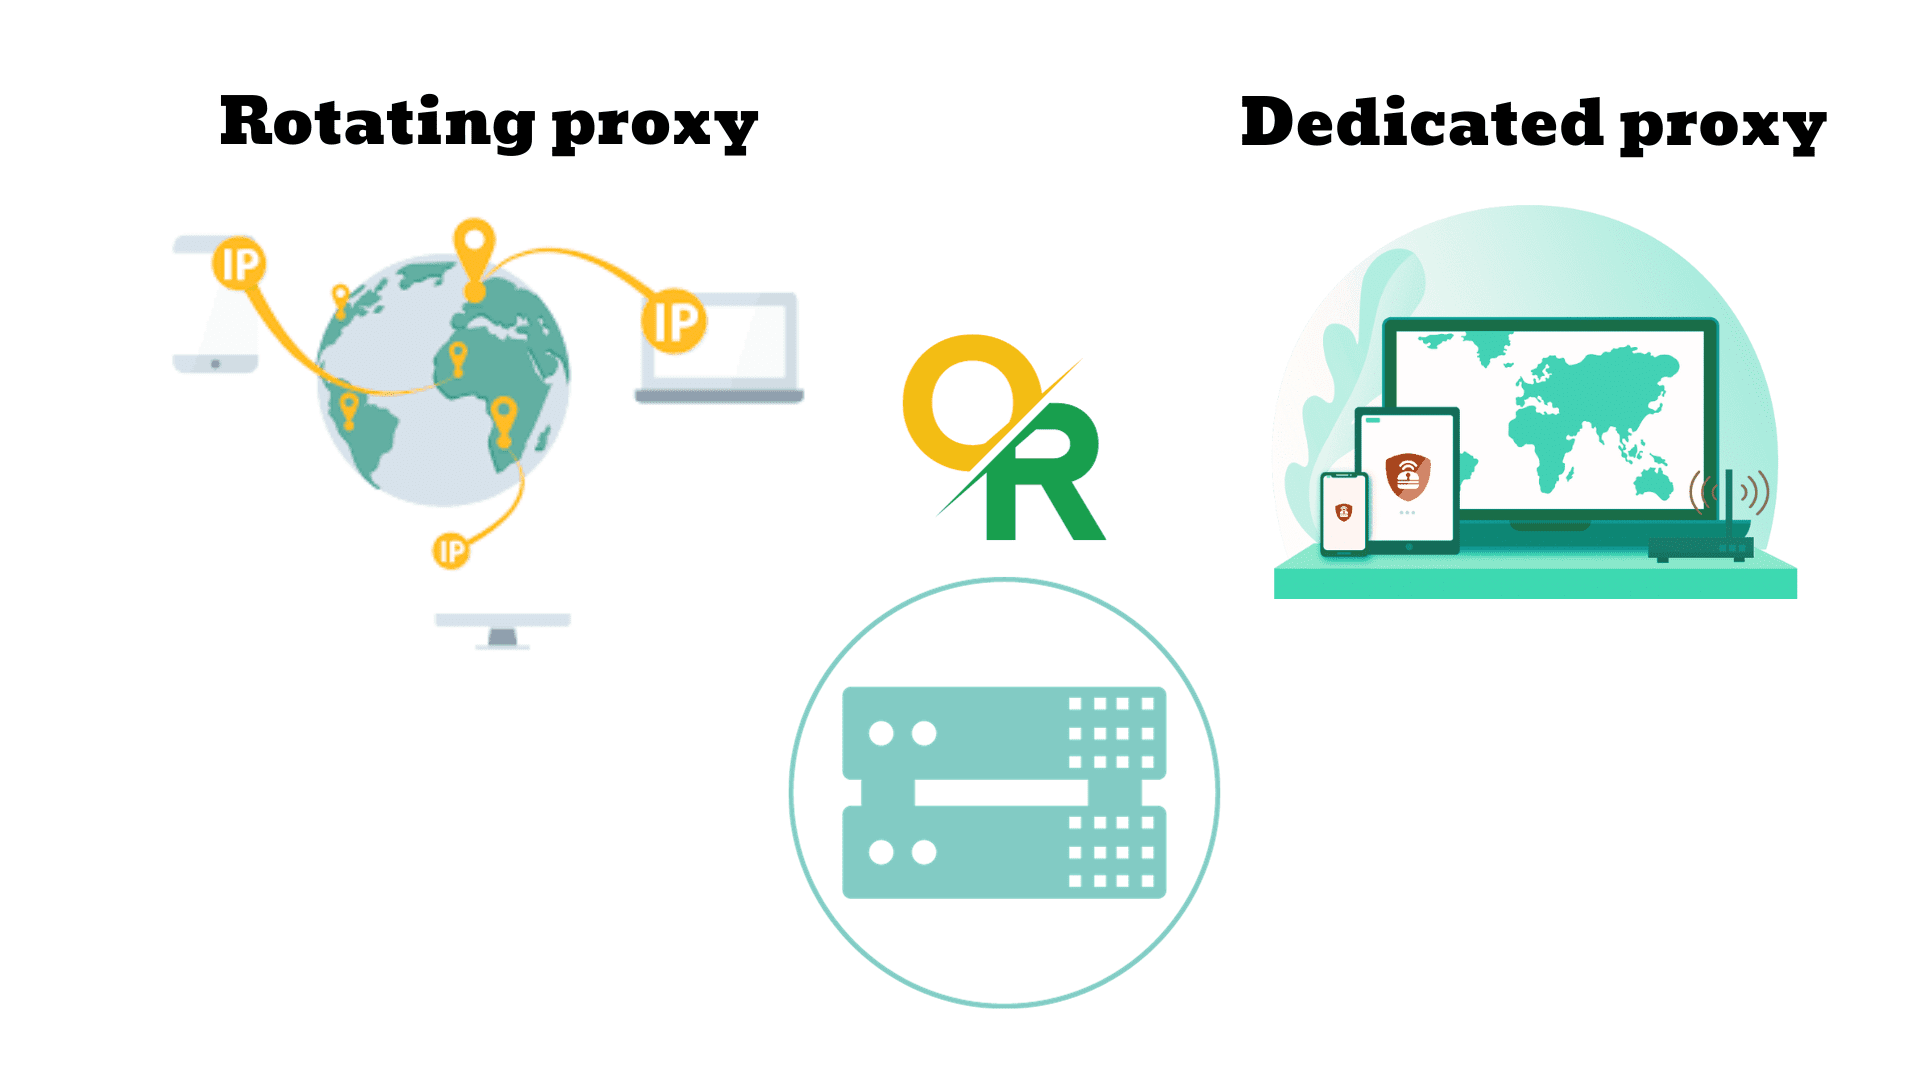 comparison between rotating proxy and dedicated proxy